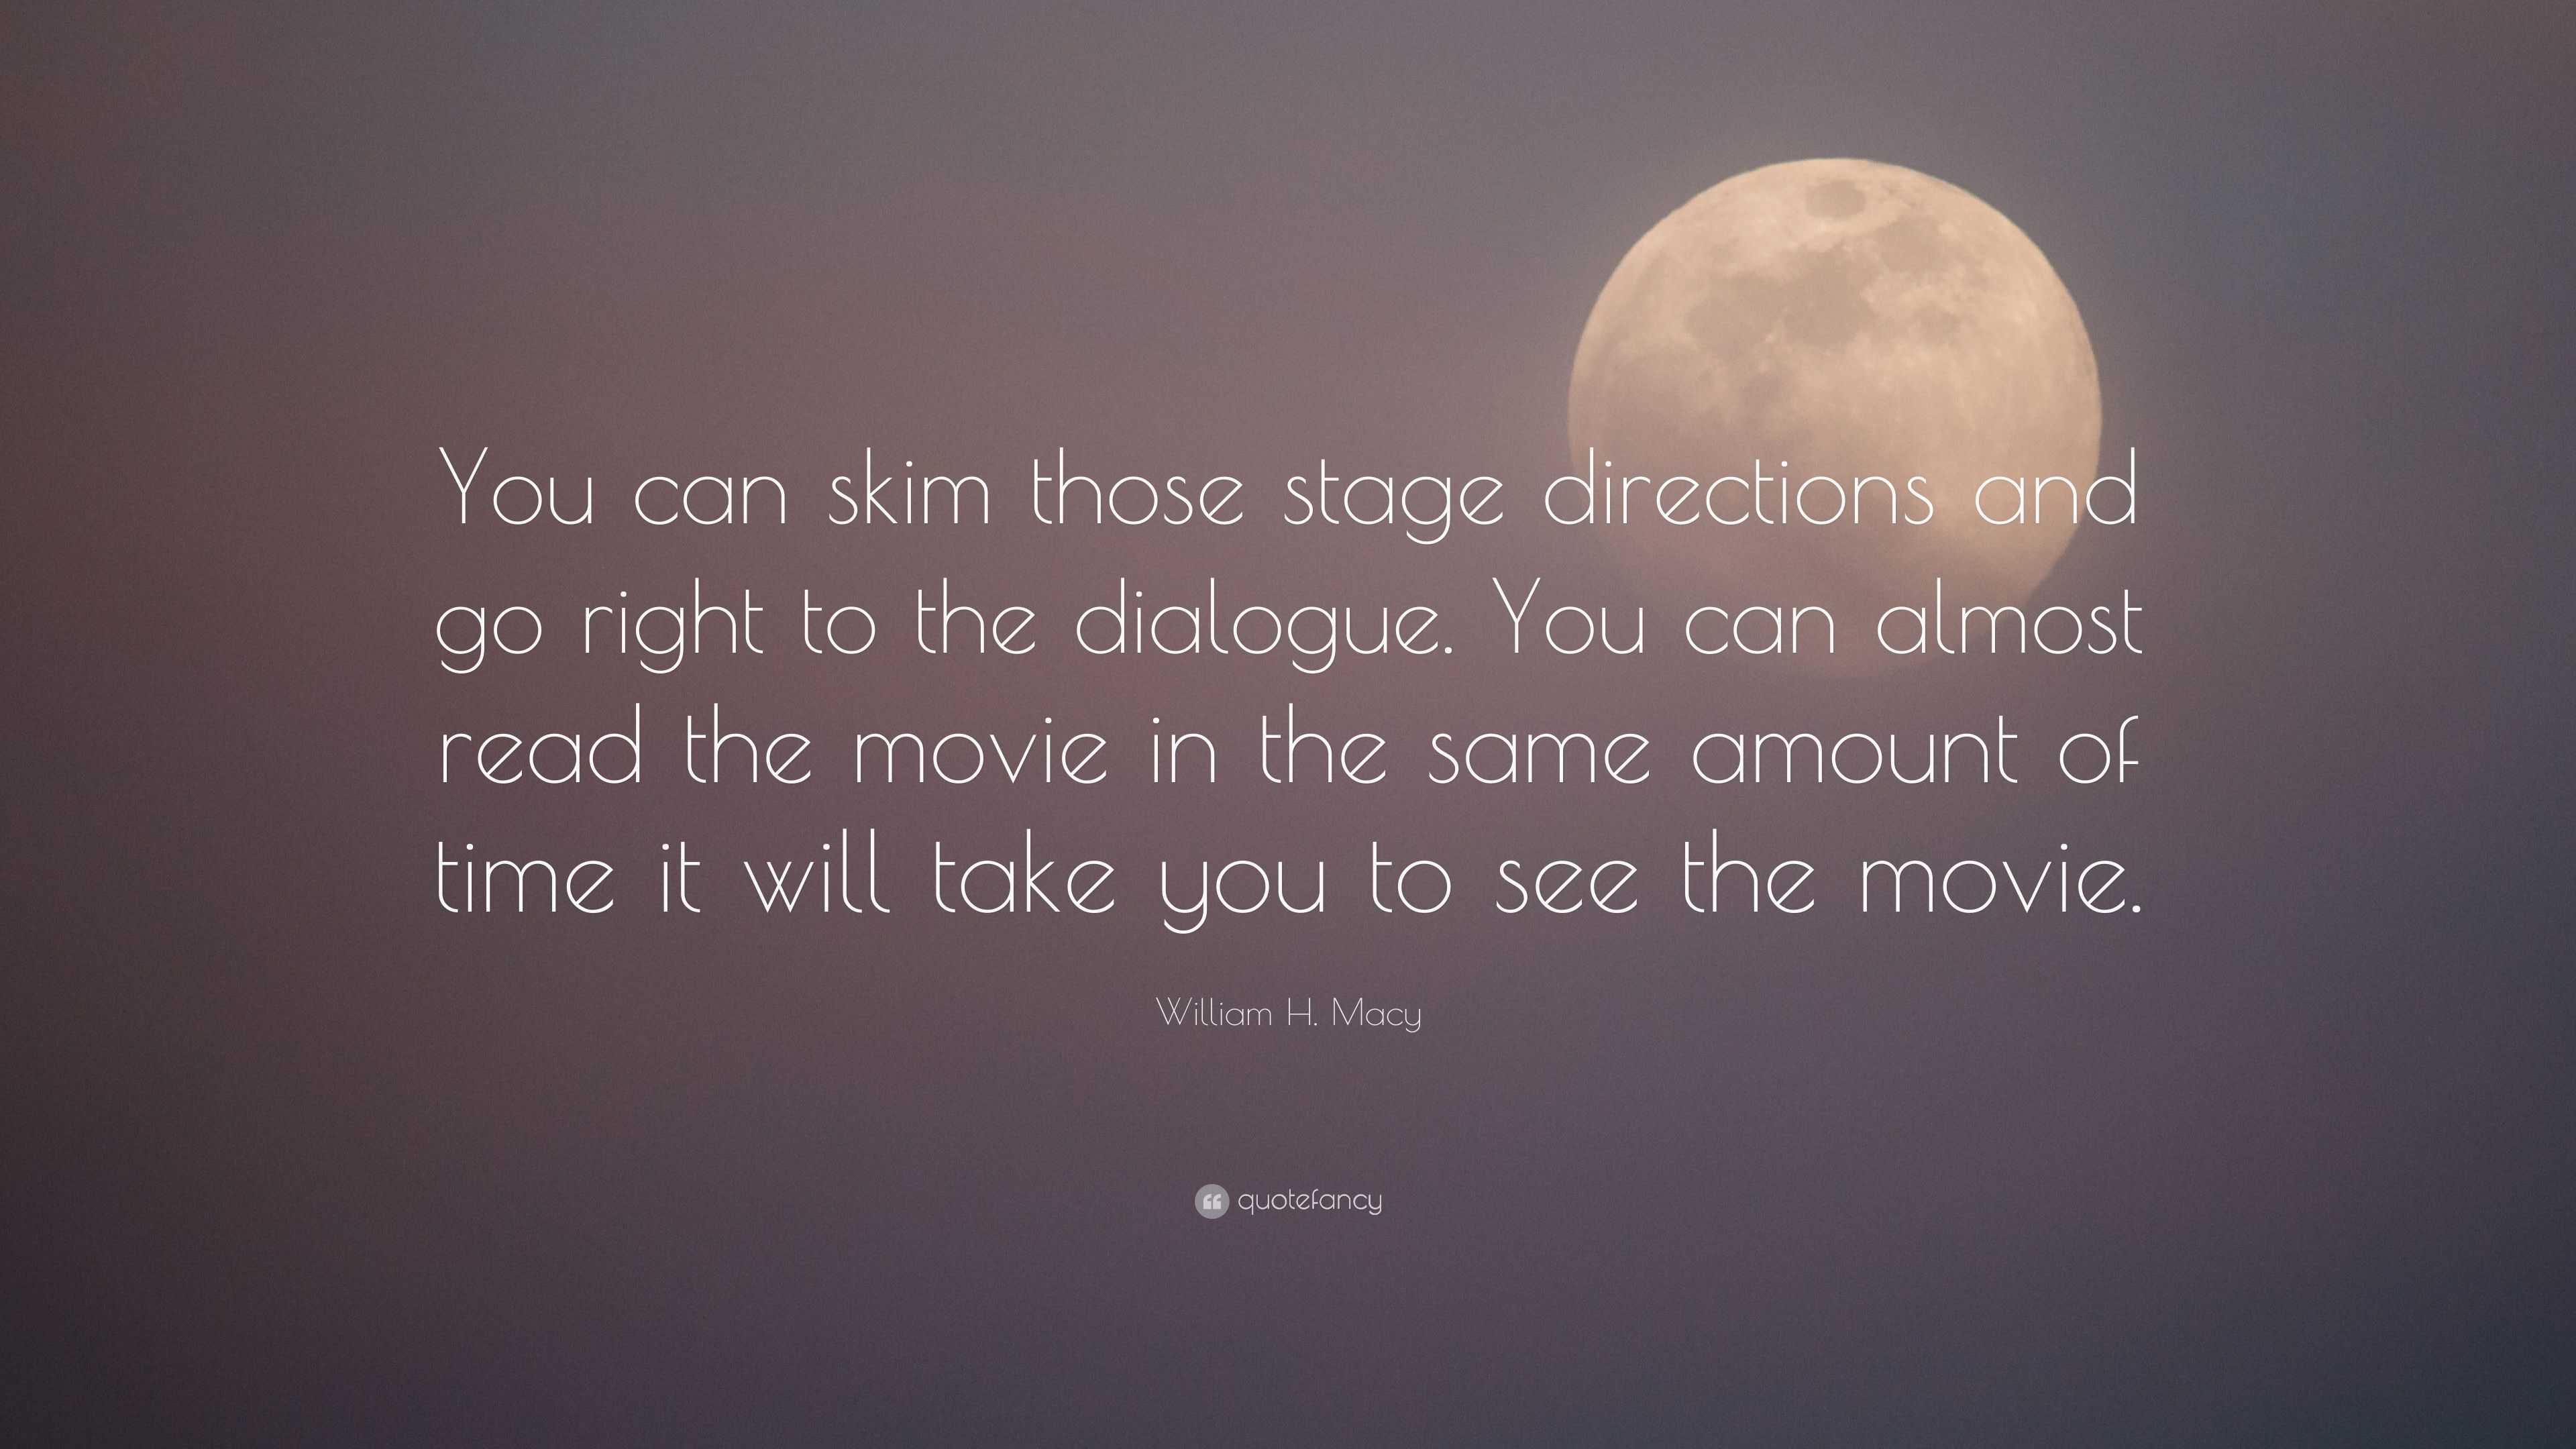 https://quotefancy.com/media/wallpaper/3840x2160/5974756-William-H-Macy-Quote-You-can-skim-those-stage-directions-and-go.jpg